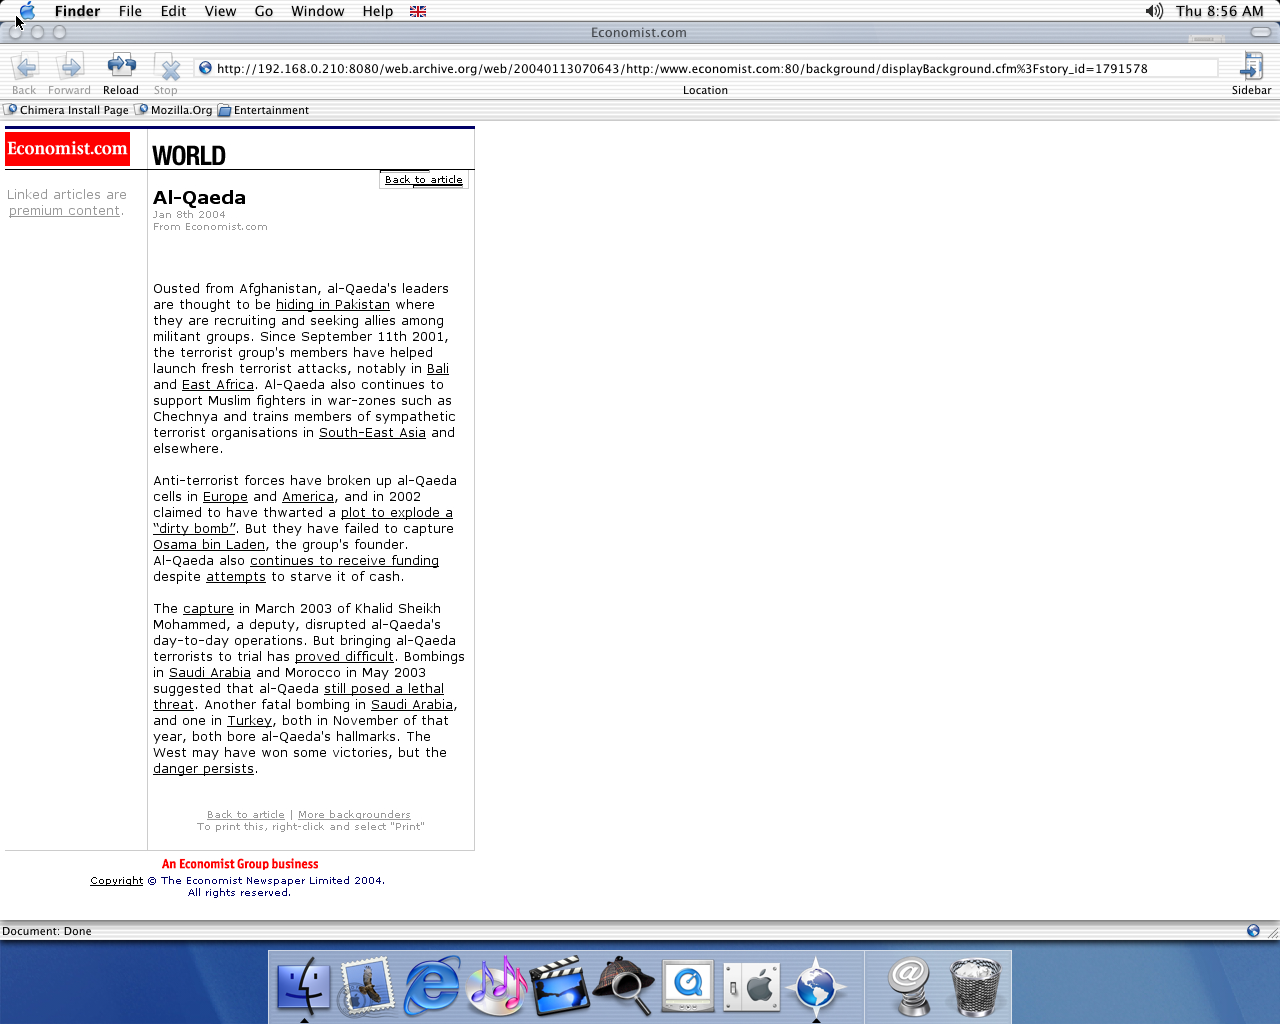 OS X 10.1 PPC with Chimera 0.6 displaying a page from The Economist archived at January 13, 2004 at 07:06:43